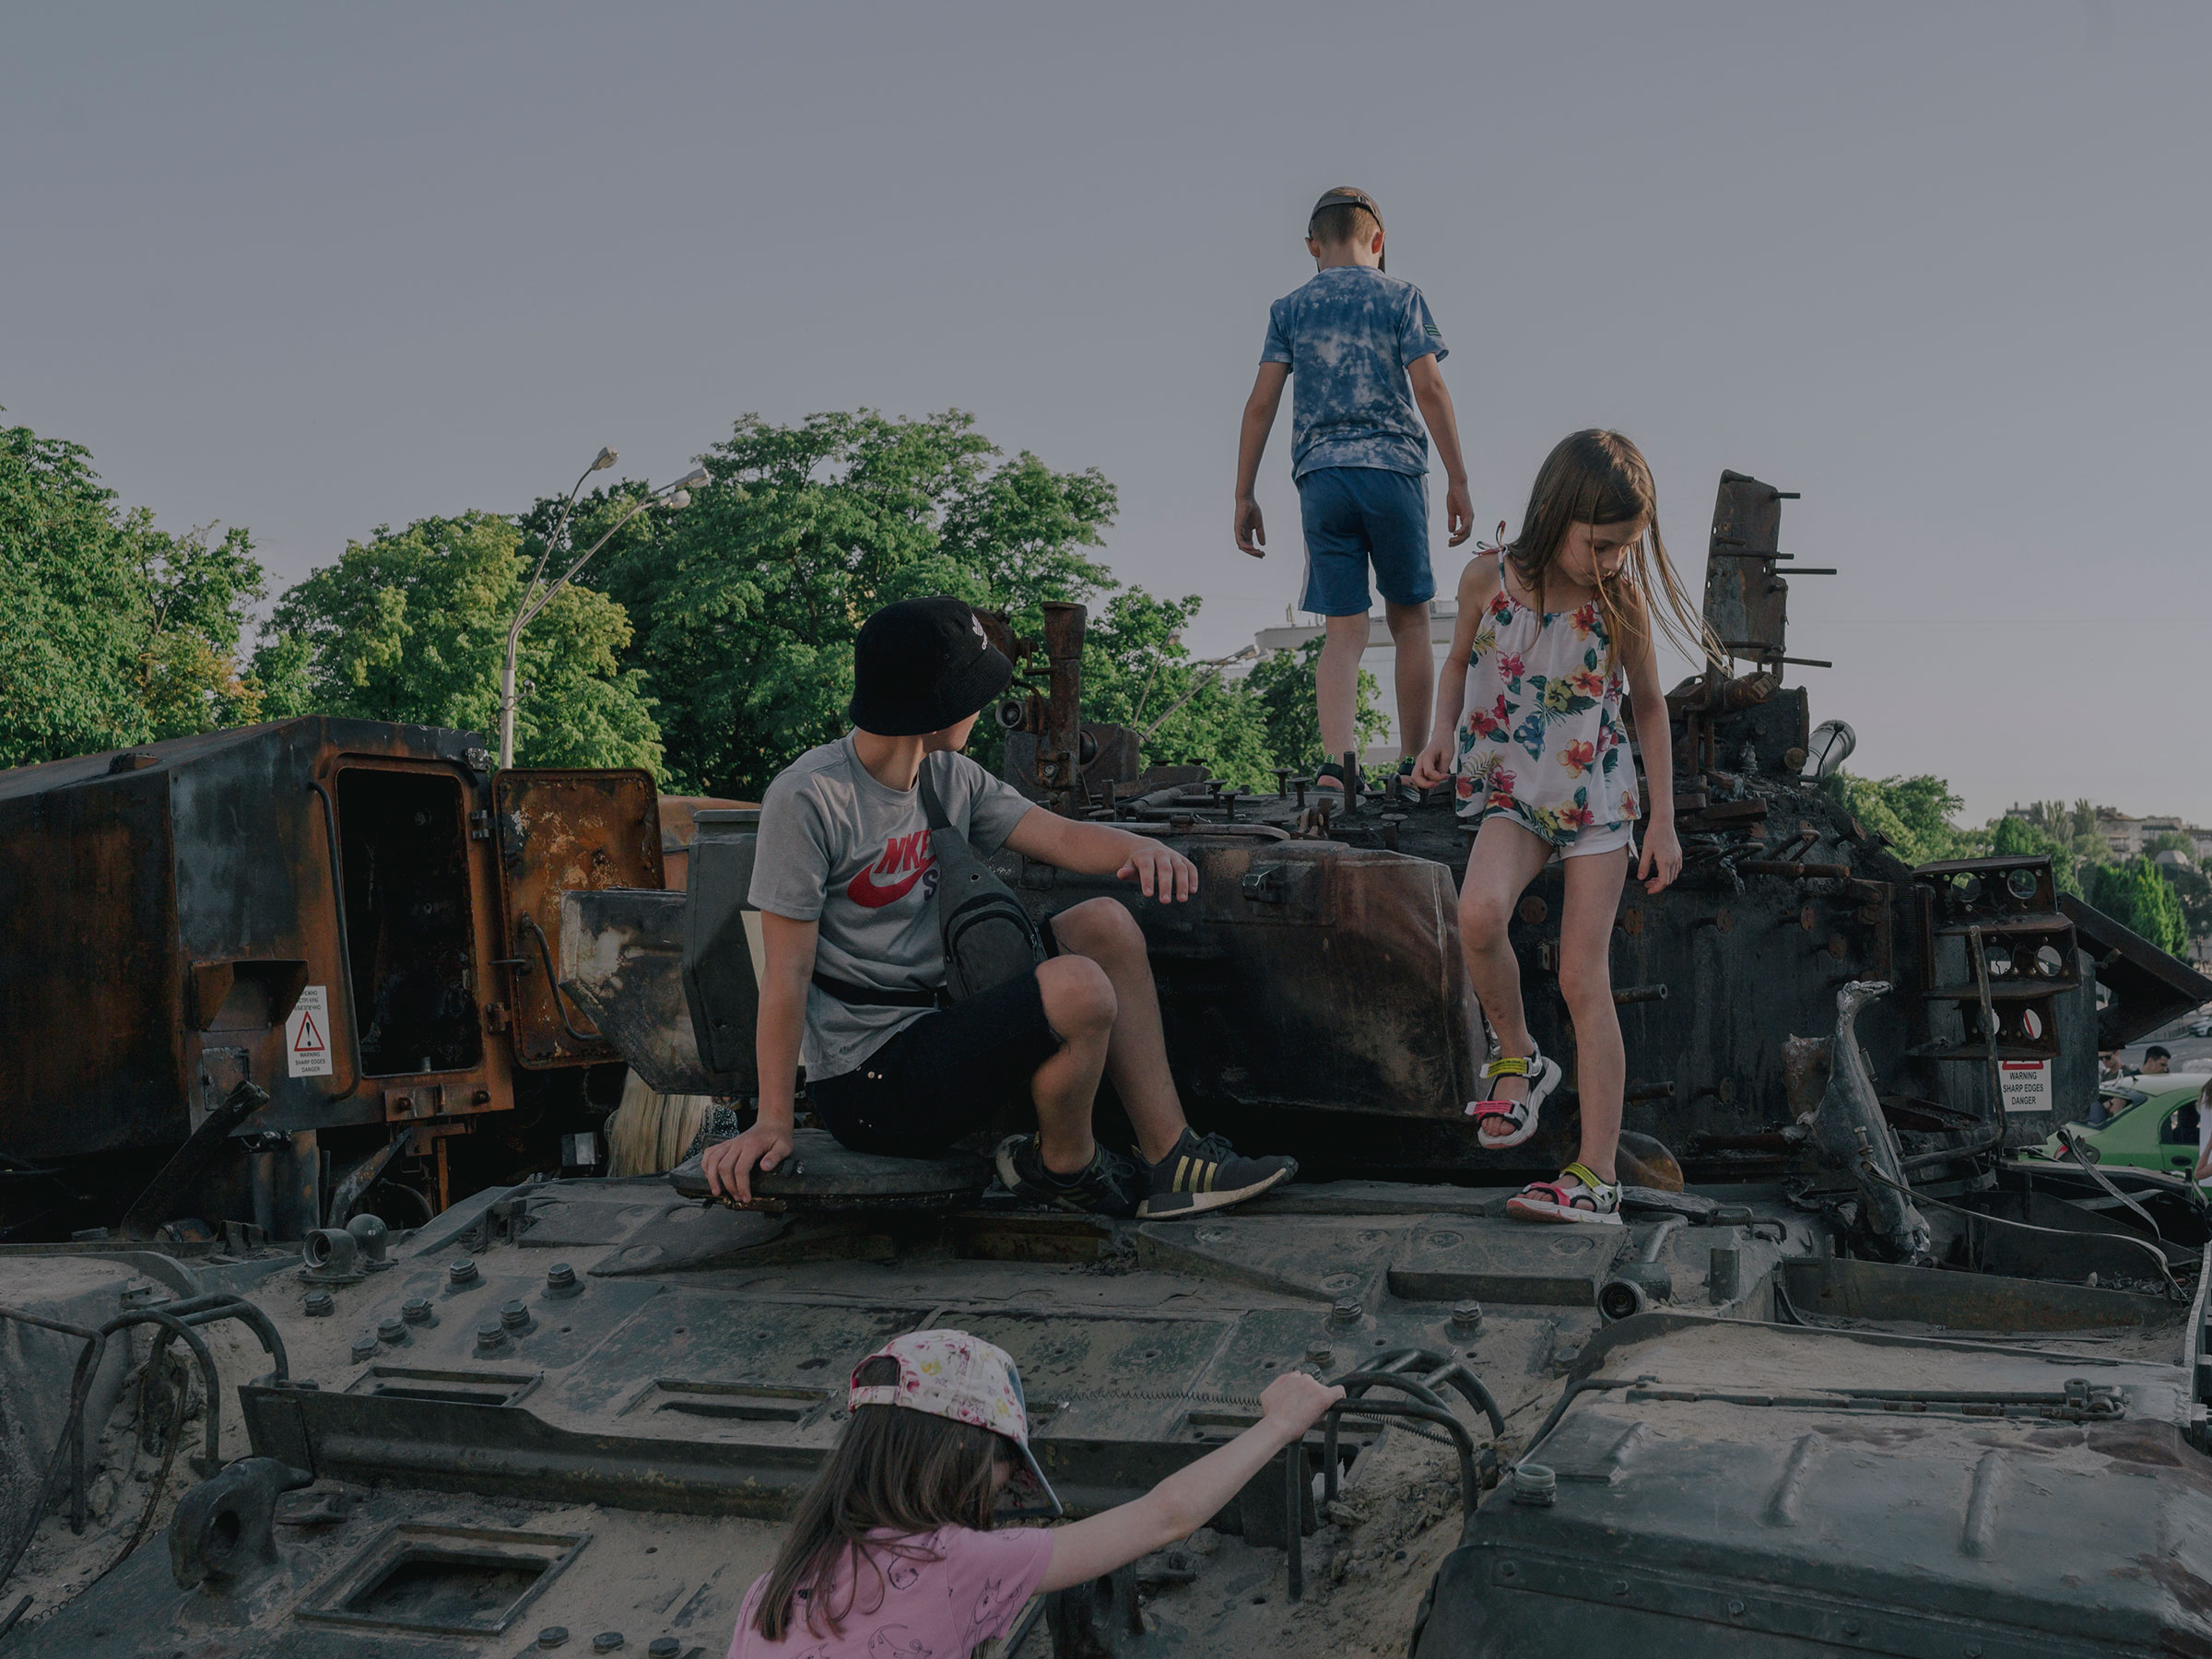 Children play on destroyed Russian war equipment in front of St. Michael‘s Monastery in Kyiv on June 12.